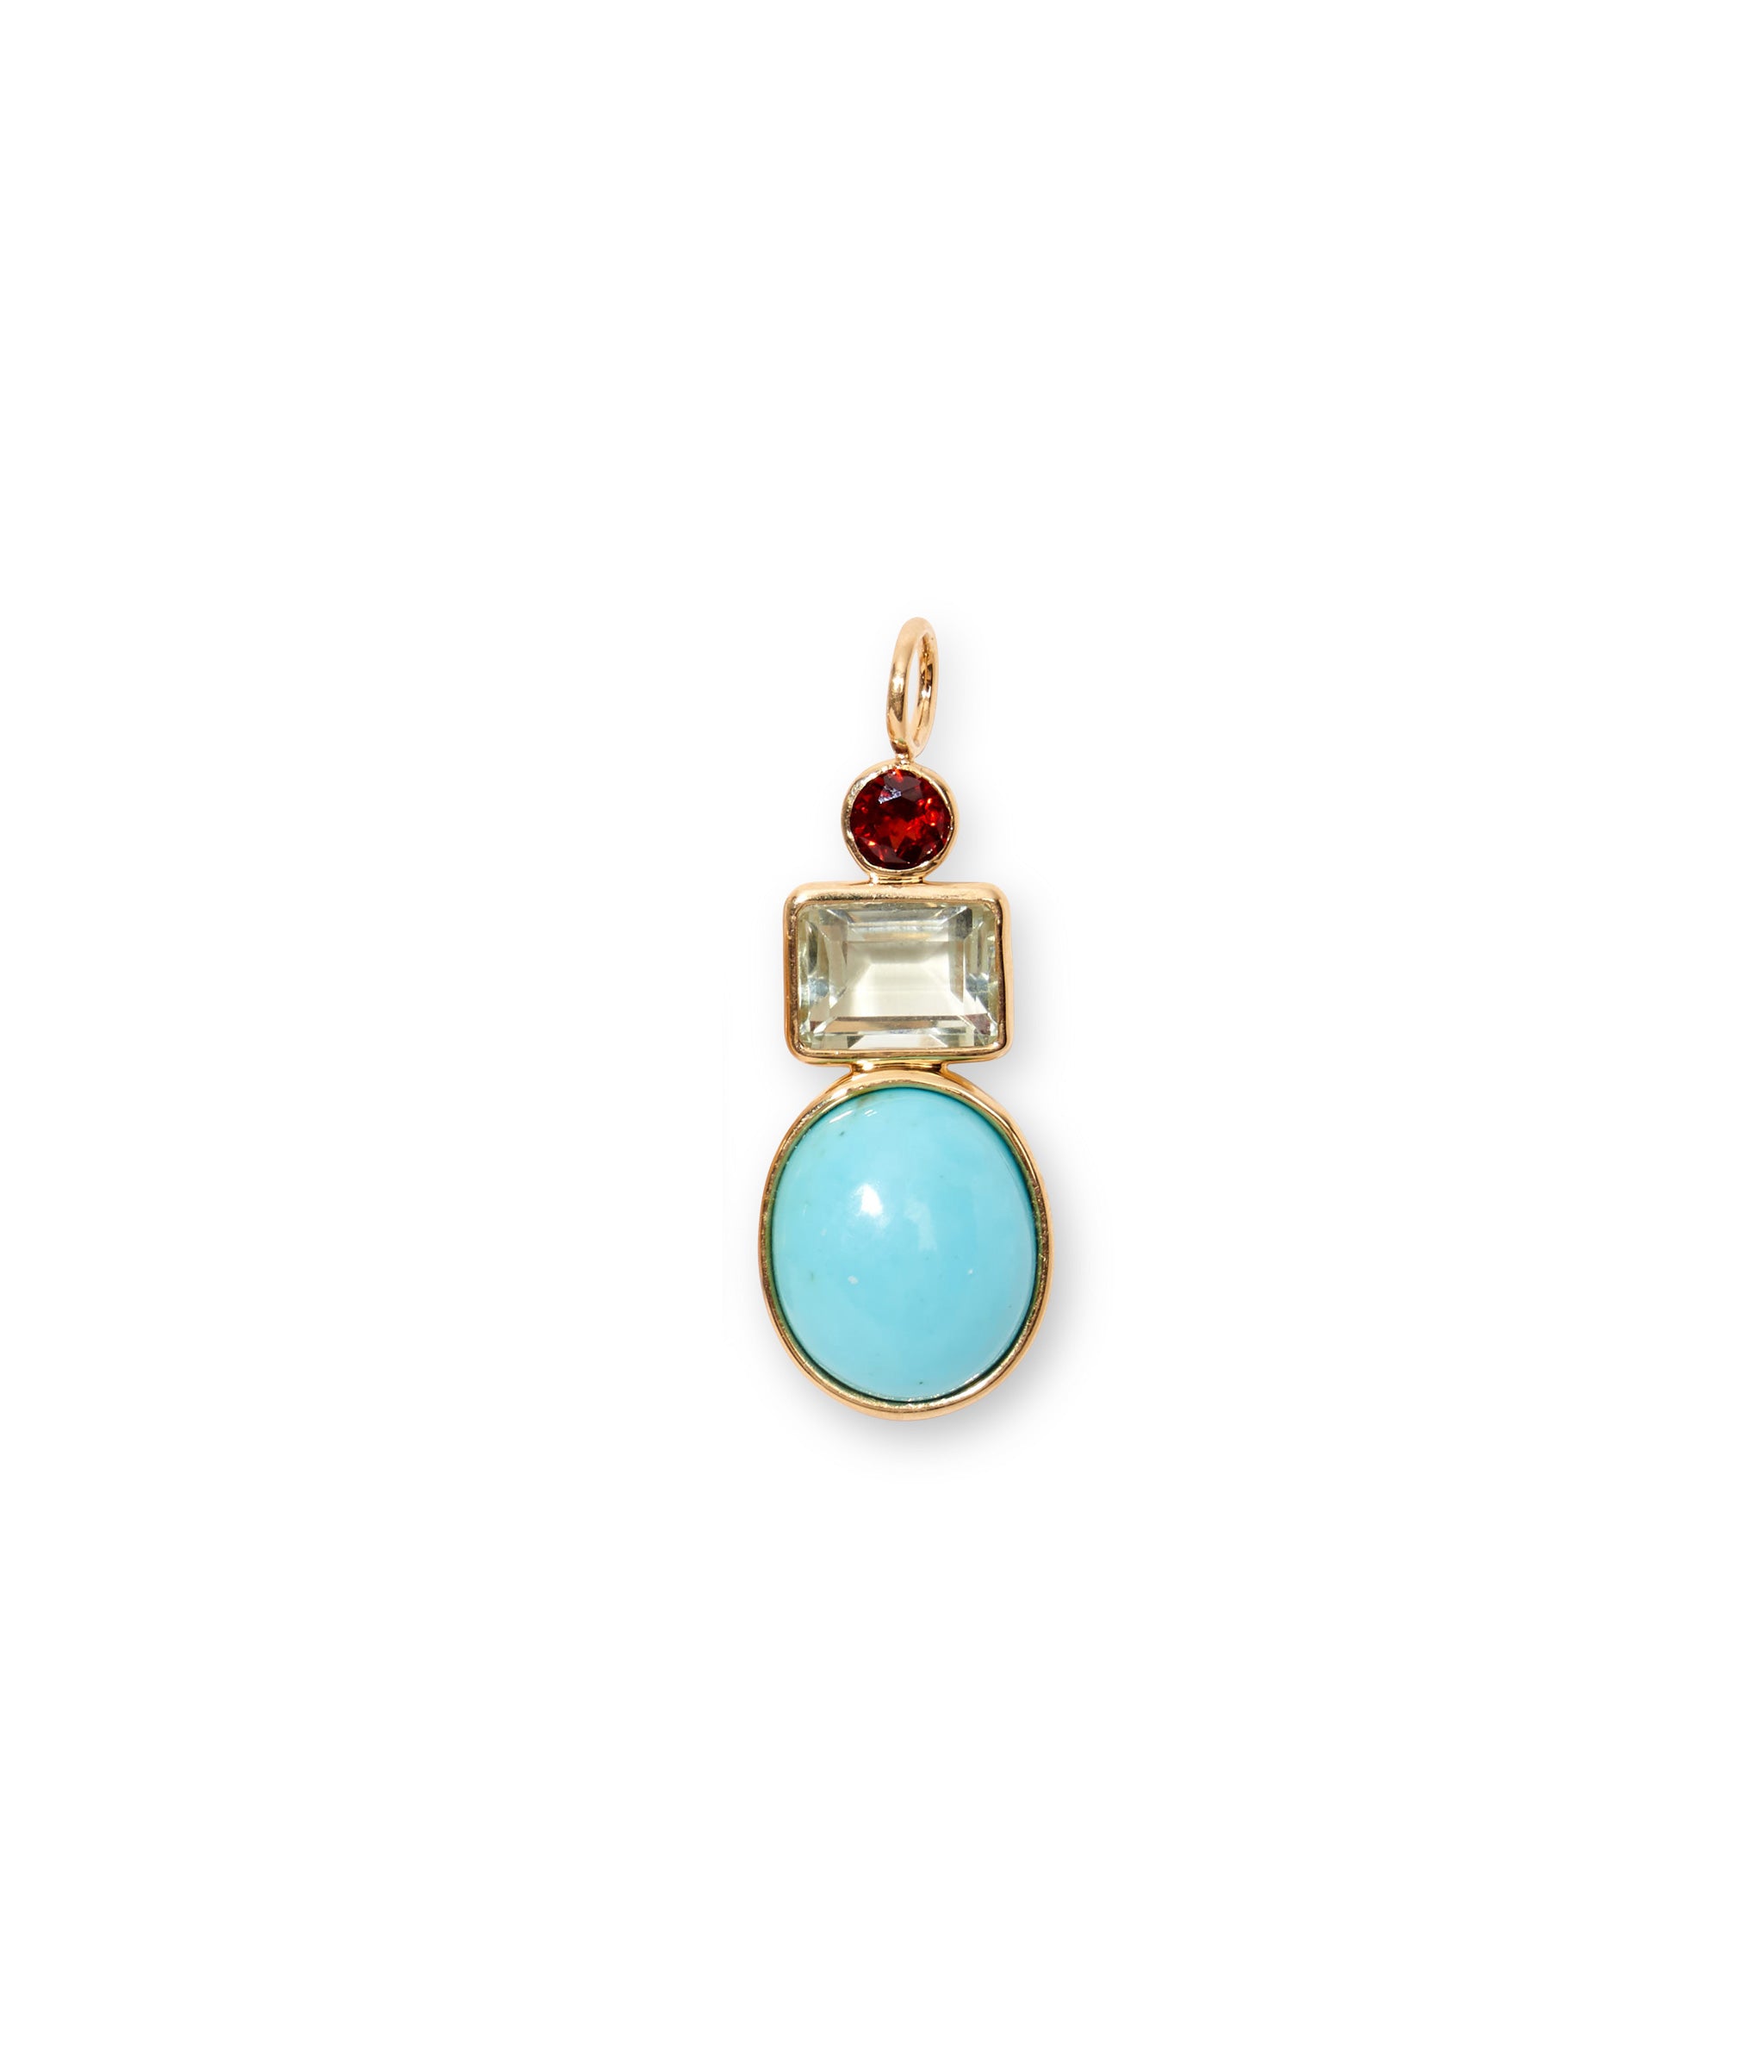 Garnet, Green Amethyst & Turquoise Cabochon 14k Gold Necklace Charm. Faceted garnet, green baguette and turquoise cabochon.